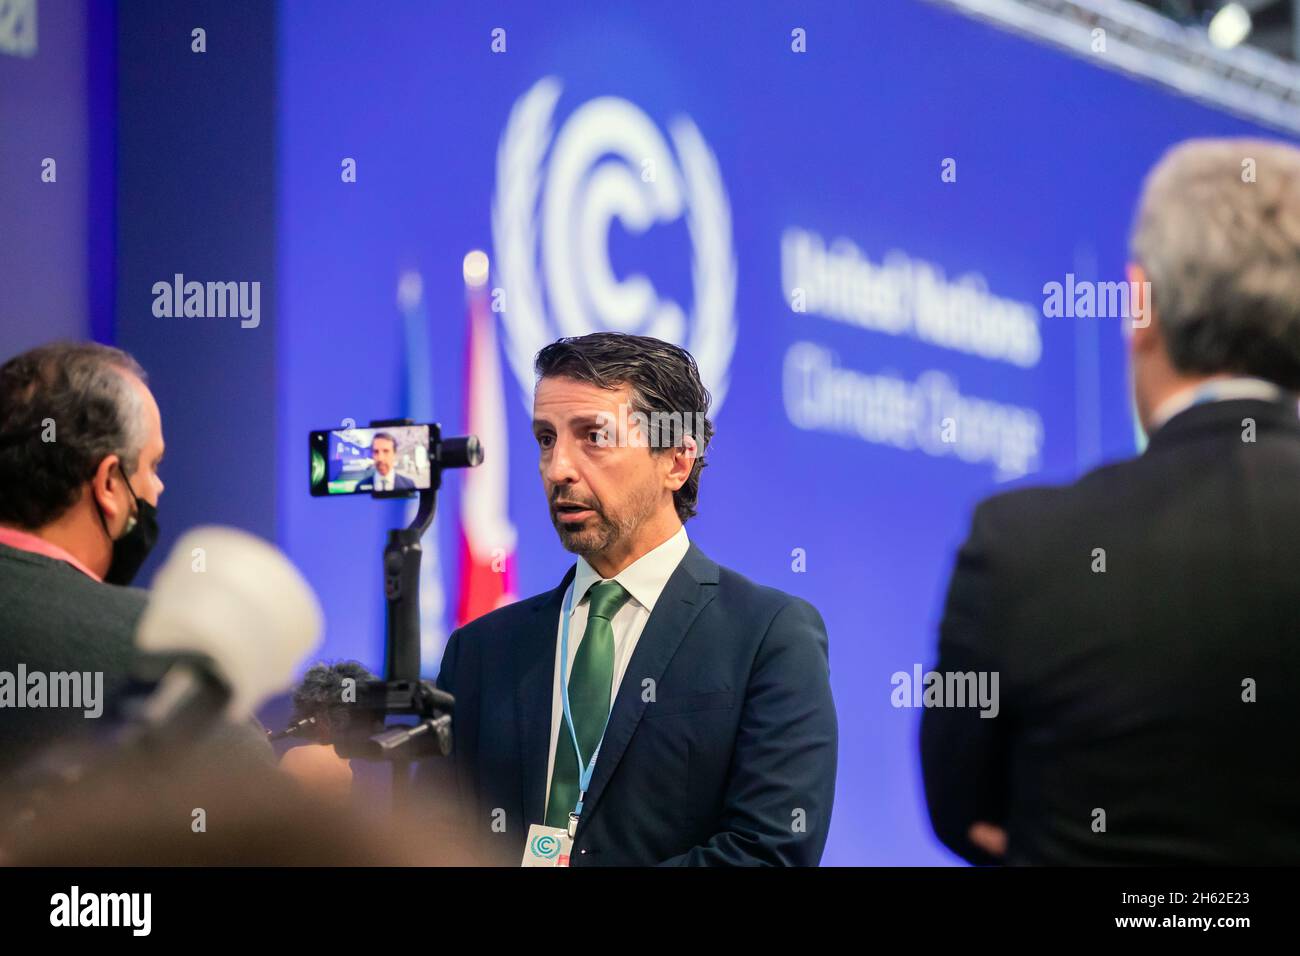 Glasgow, UK. 12th Nov, 2021. Joaquim Alvaro Pereira Leite, Minister of Environment of Brazil, speaks to a journalist's smartphone during a break in the session at the UN Climate Change Conference COP26. The world climate conference is taking place in Glasgow. Around 200 countries are negotiating how to curb the global climate crisis and global warming. Credit: Christoph Soeder/dpa/Alamy Live News Stock Photo